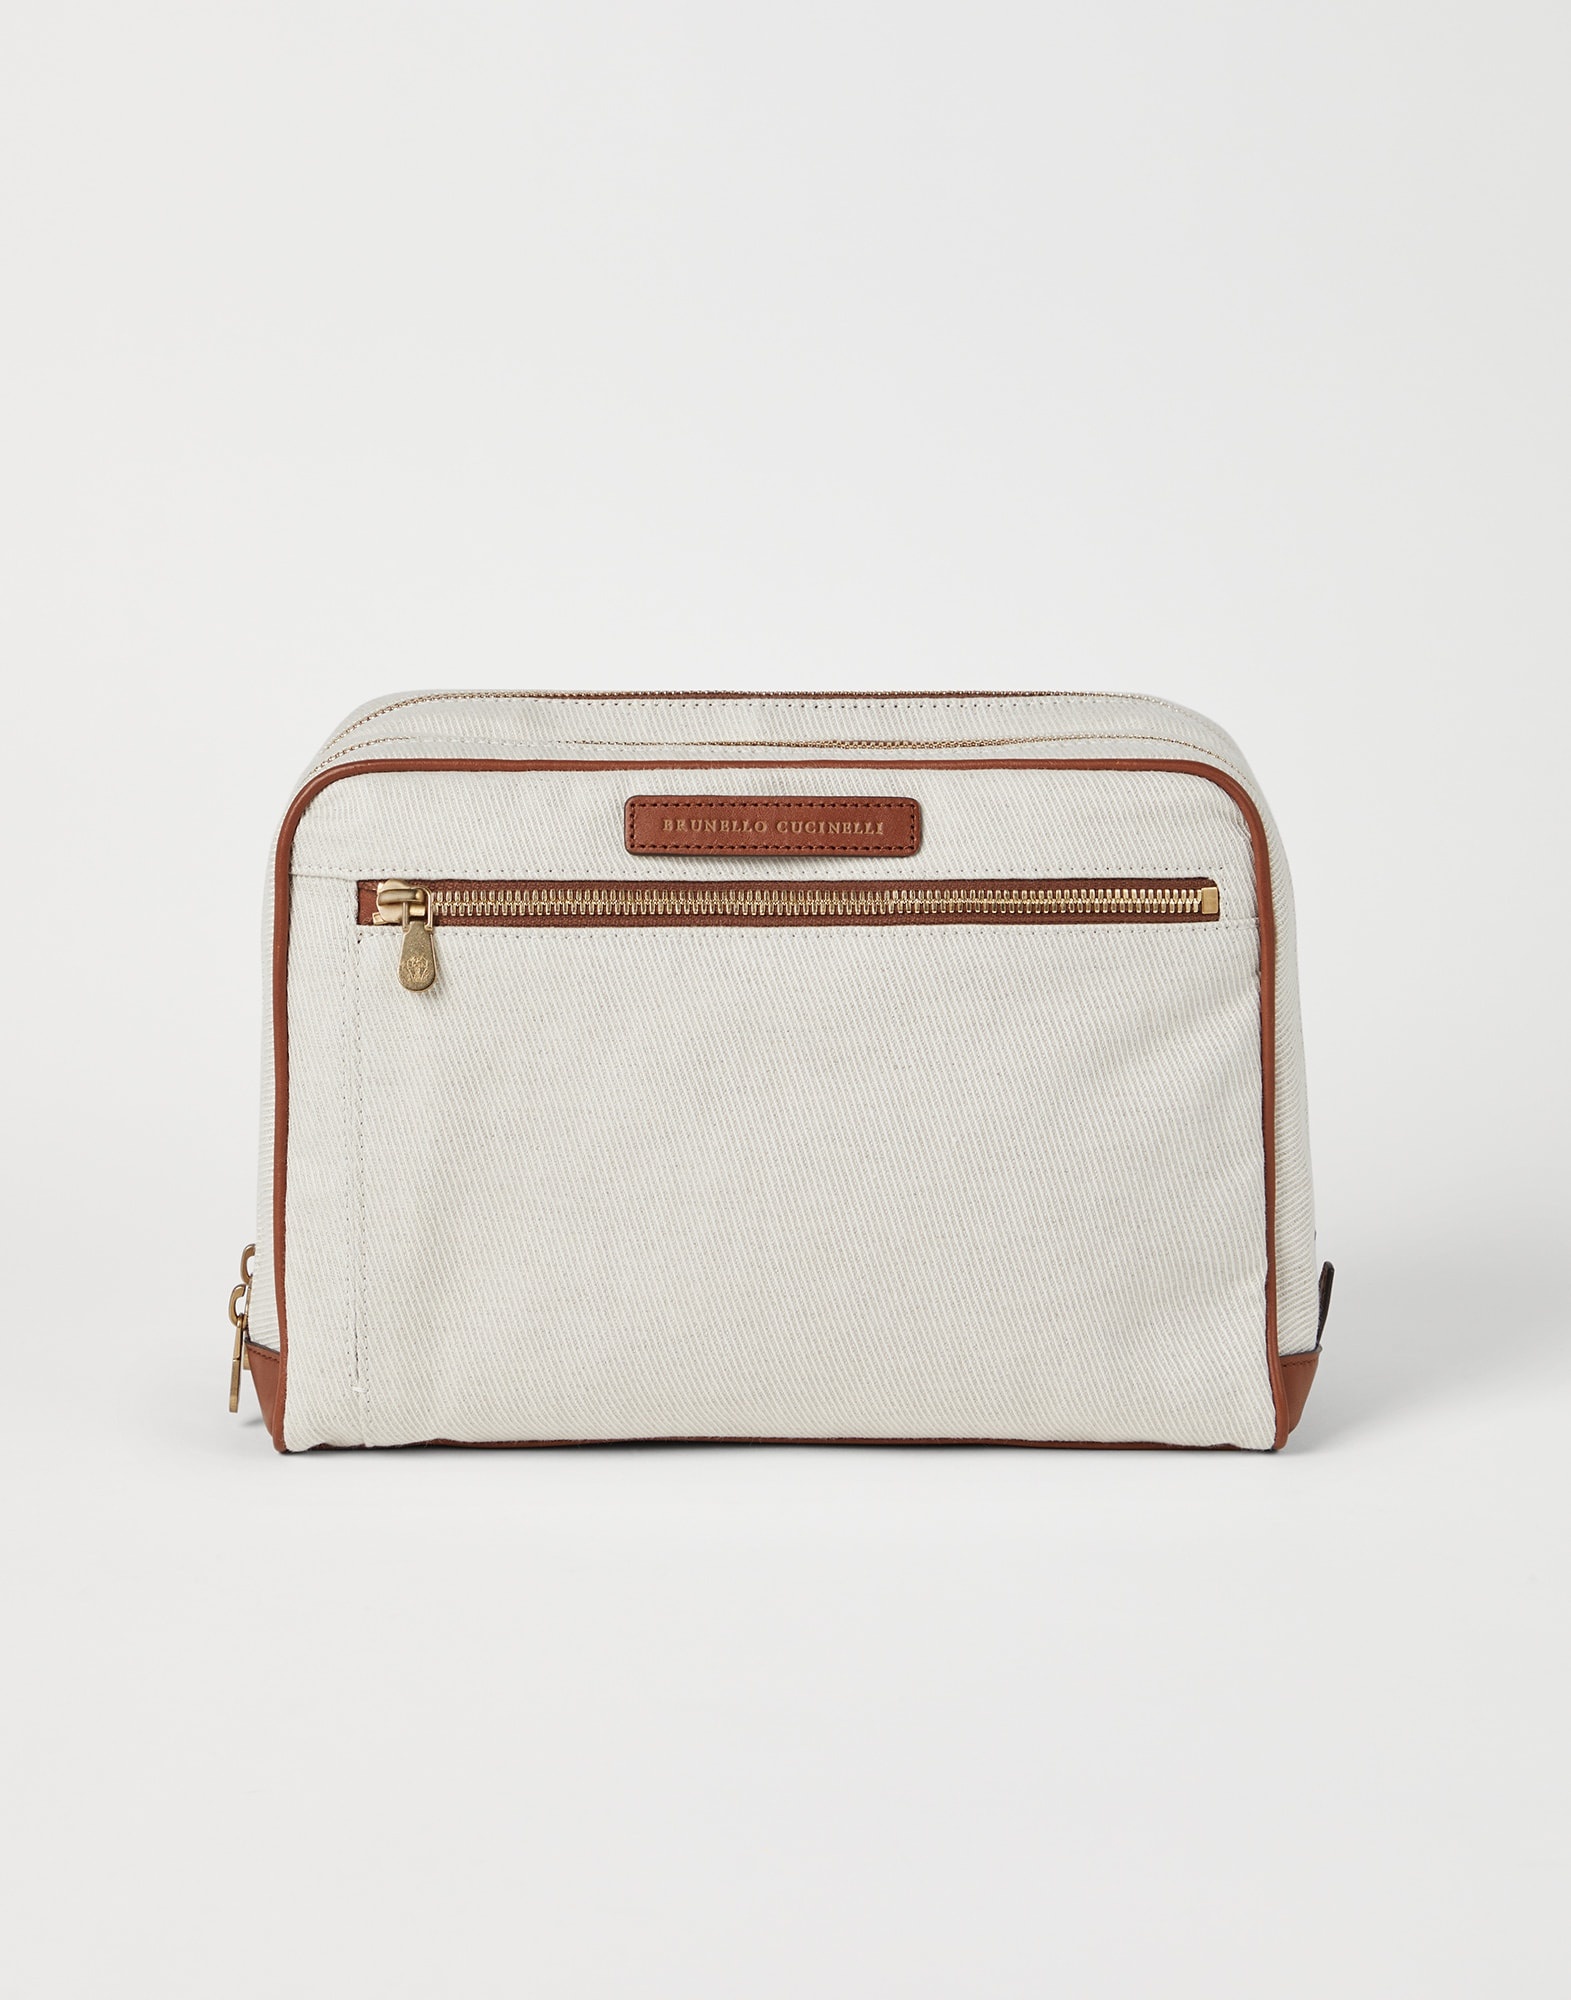 Cotton and linen cavalry and calfskin beauty case - 1